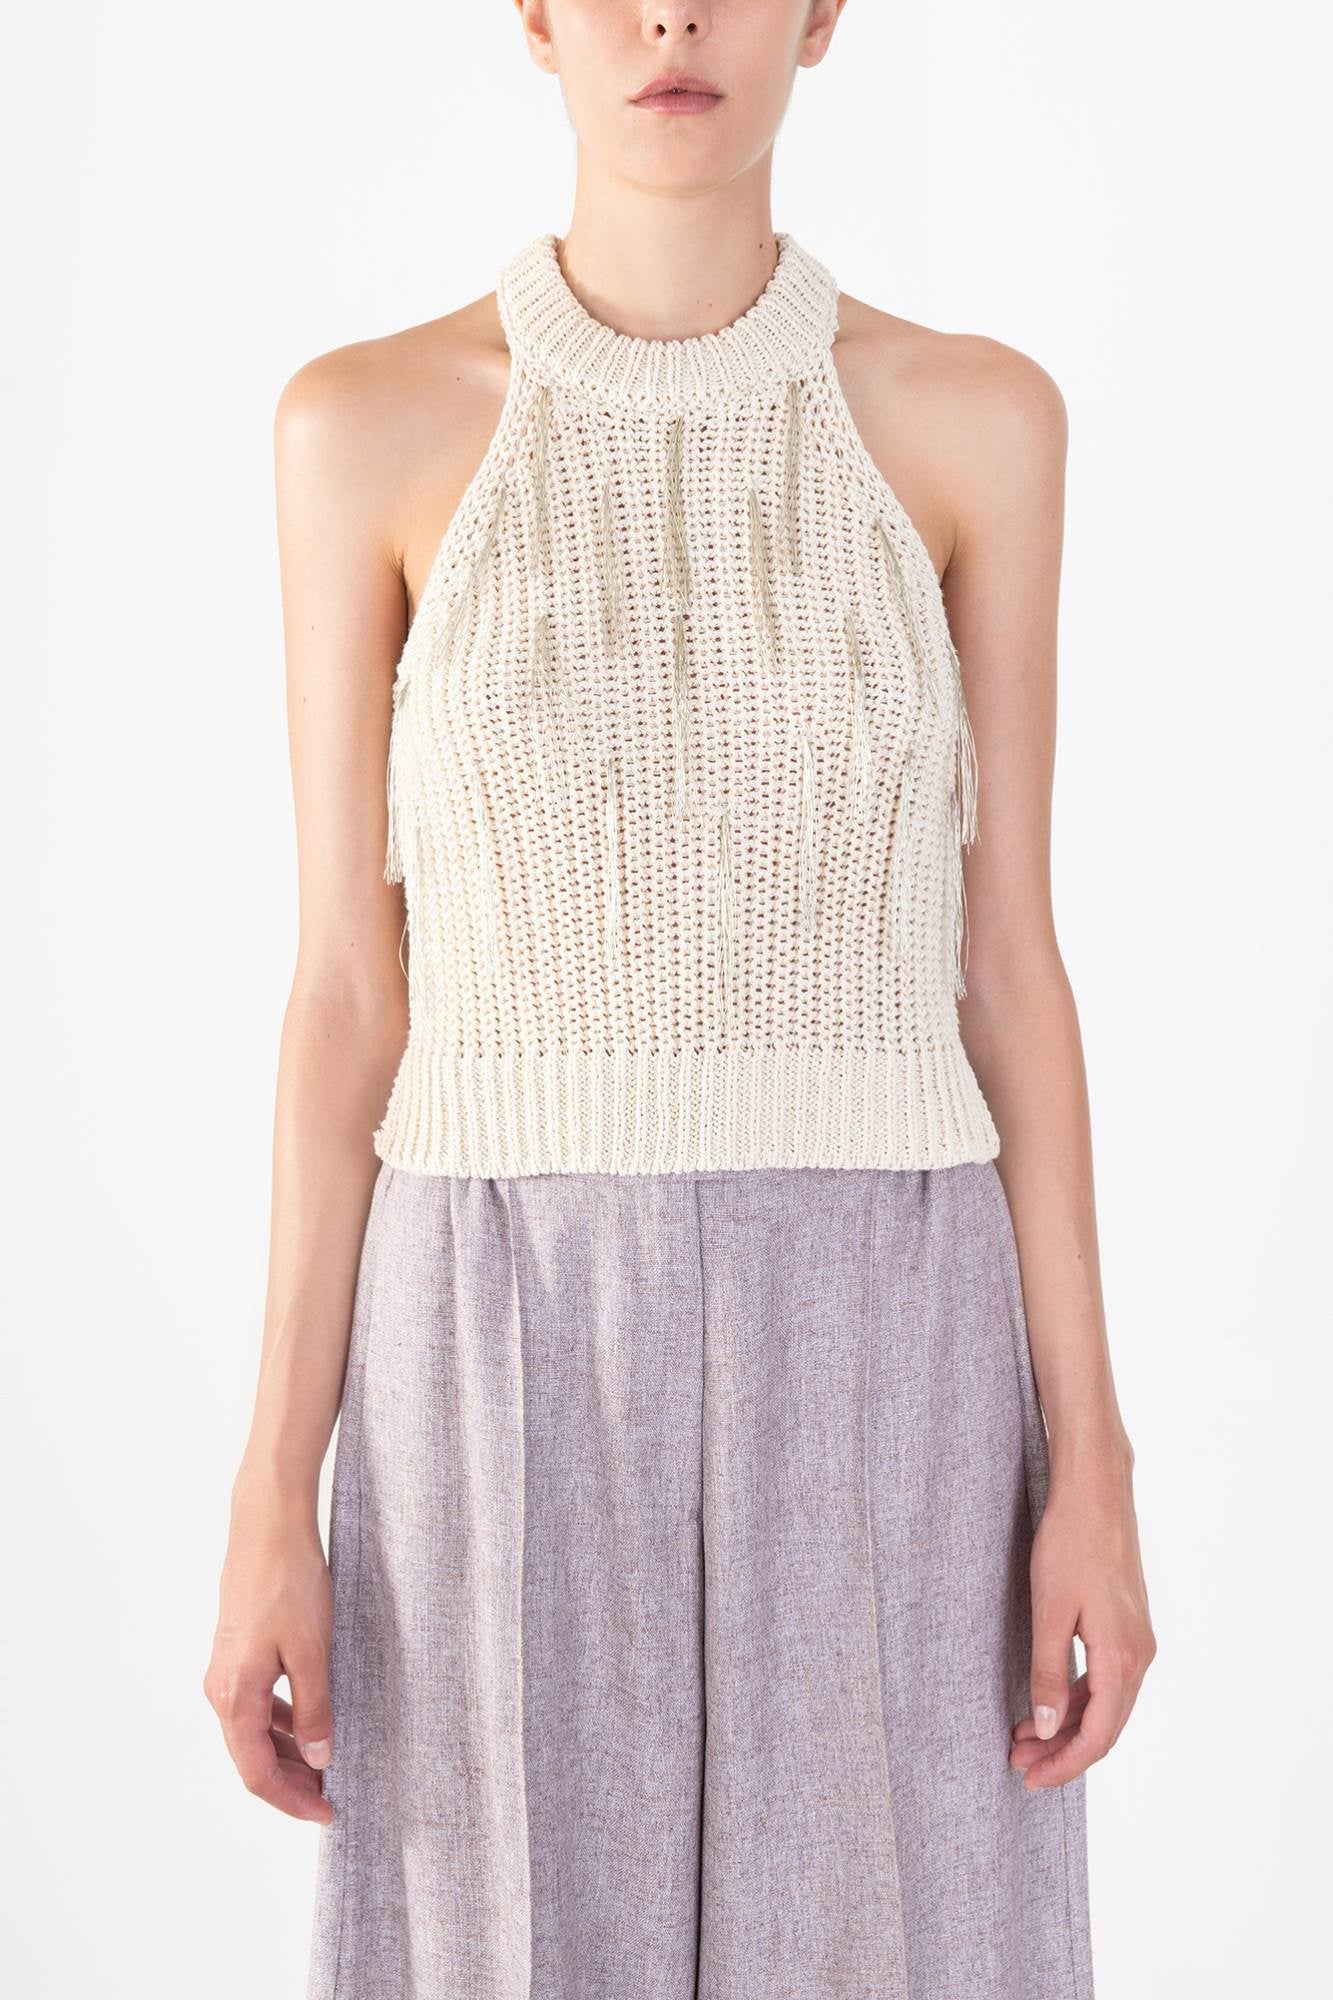 KNIT TOP WITH FRINGE EMBROIDERY